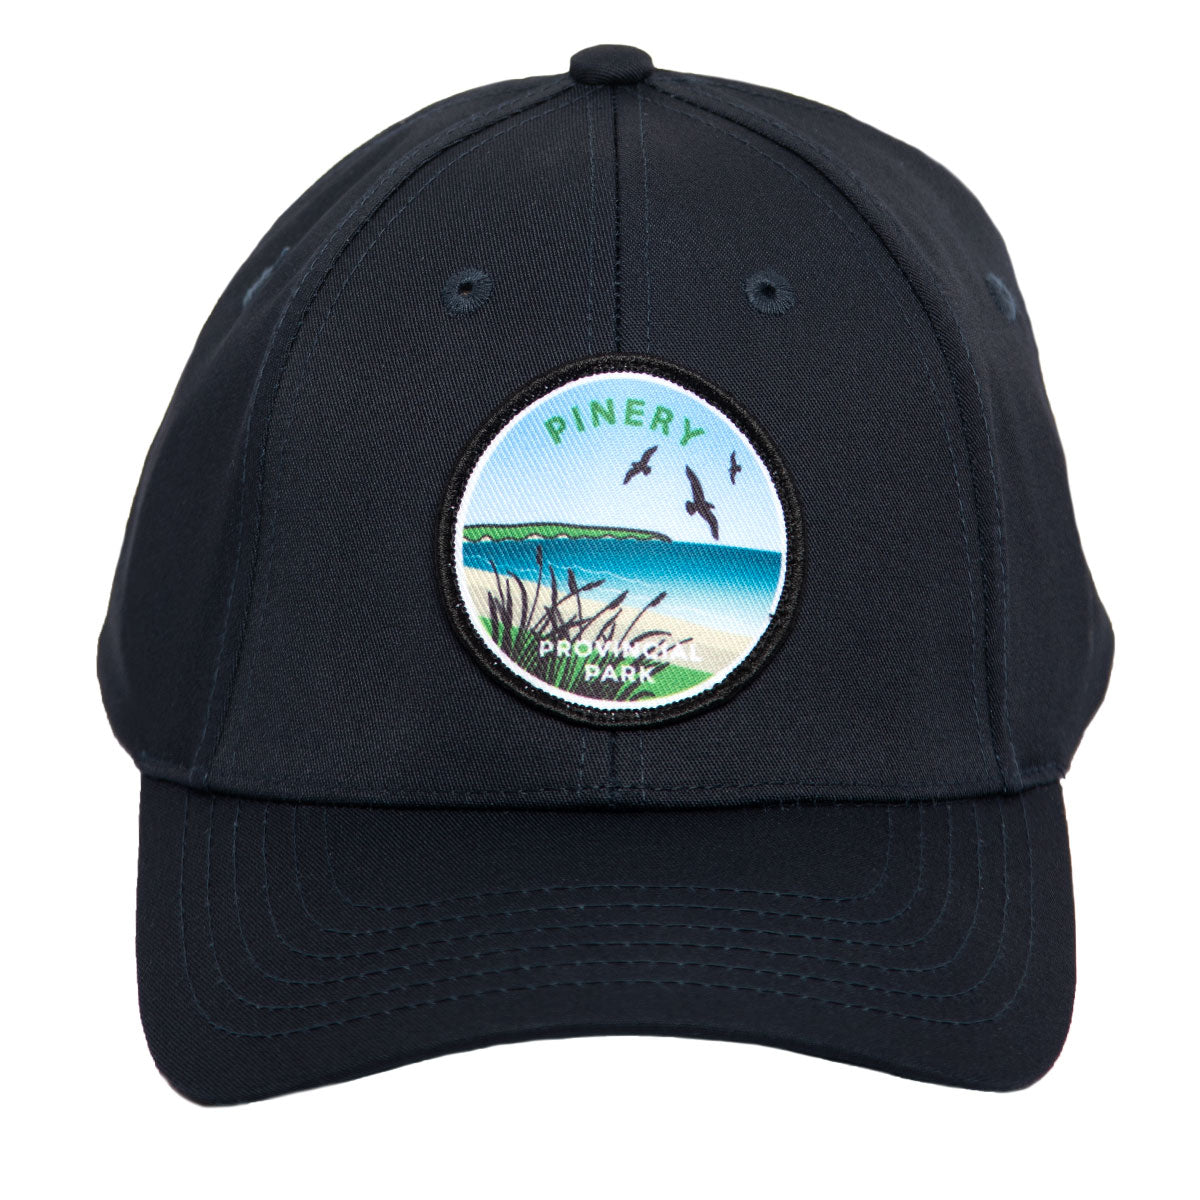 Navy park specific ball cap, featuring embroidered Pinery Provincial Park crest. Front view of brim. 